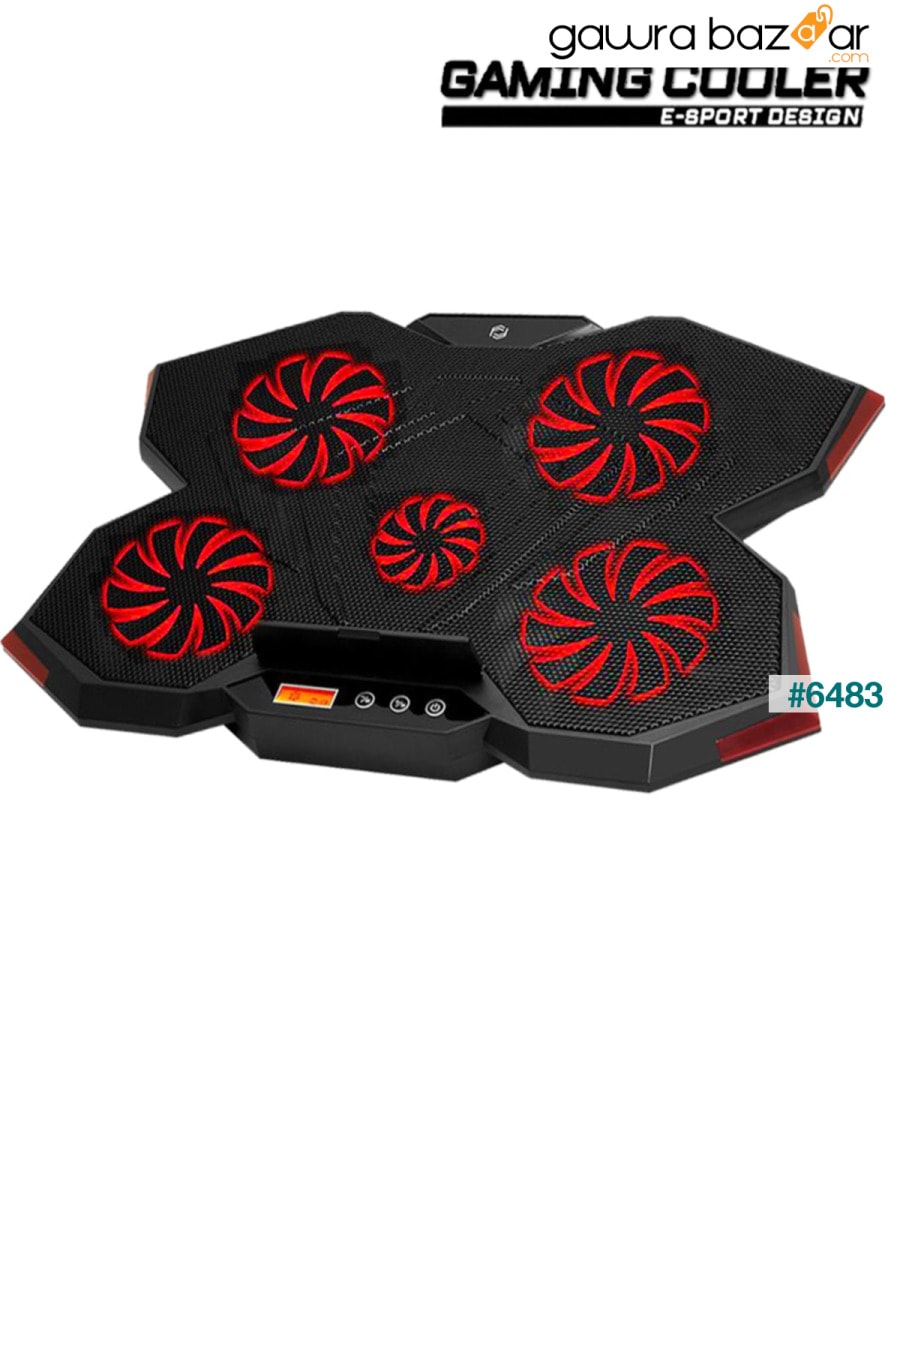 Gp5 E-sport Design 5 Fan Led Lcd Control Panel 15-17 &quot;متوافق مع Pro Stand Notebook Cooler Frisby 6